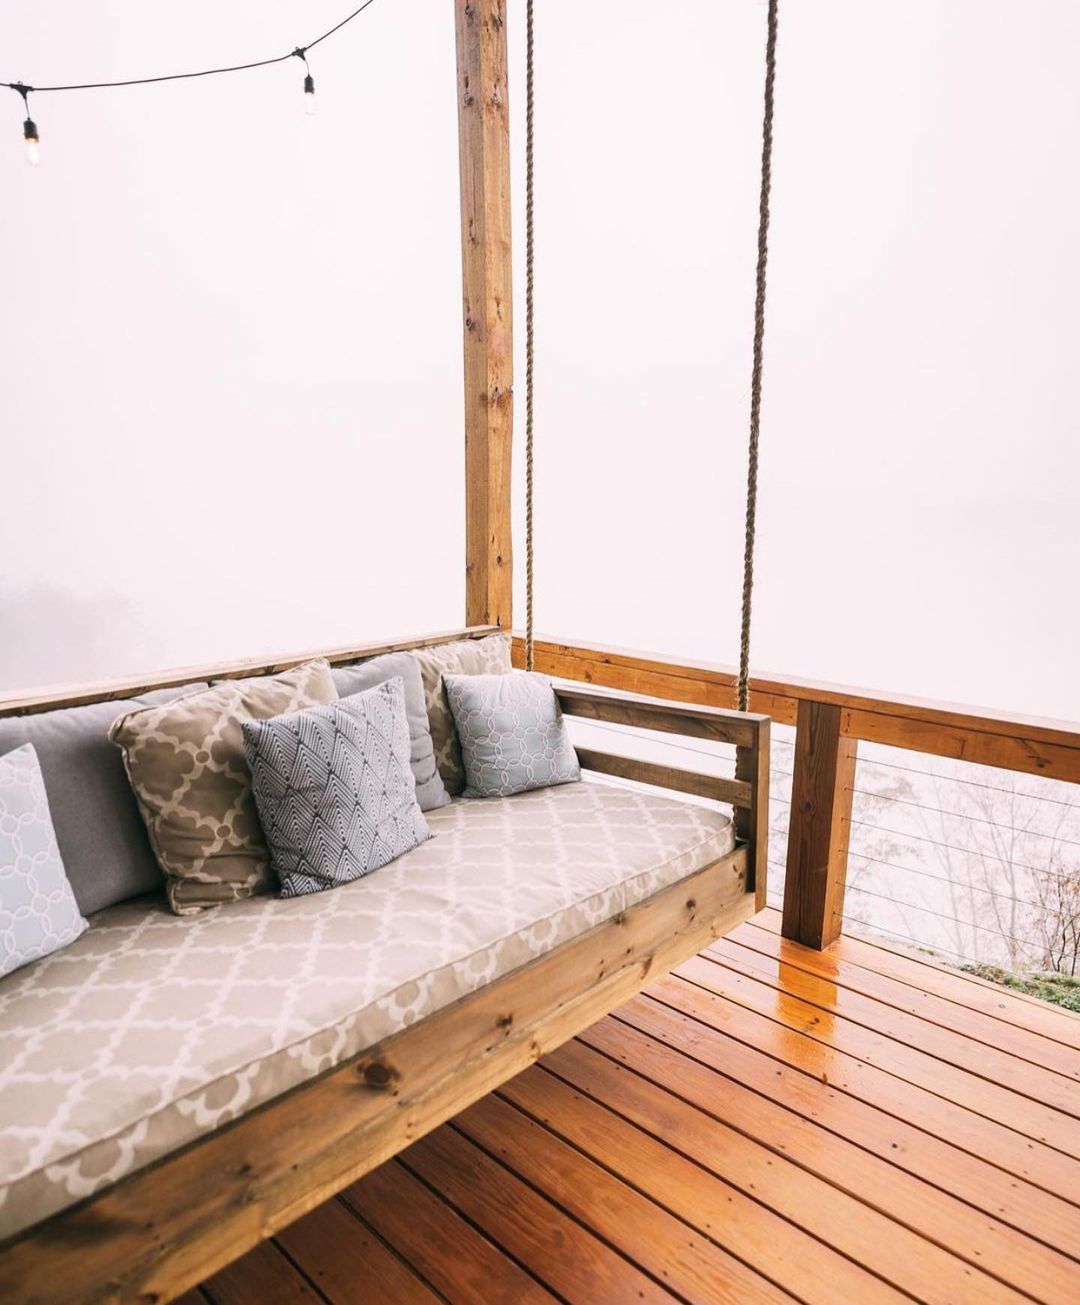 Wooden bench on the porch with a lot of pillows, and fairy lights above it